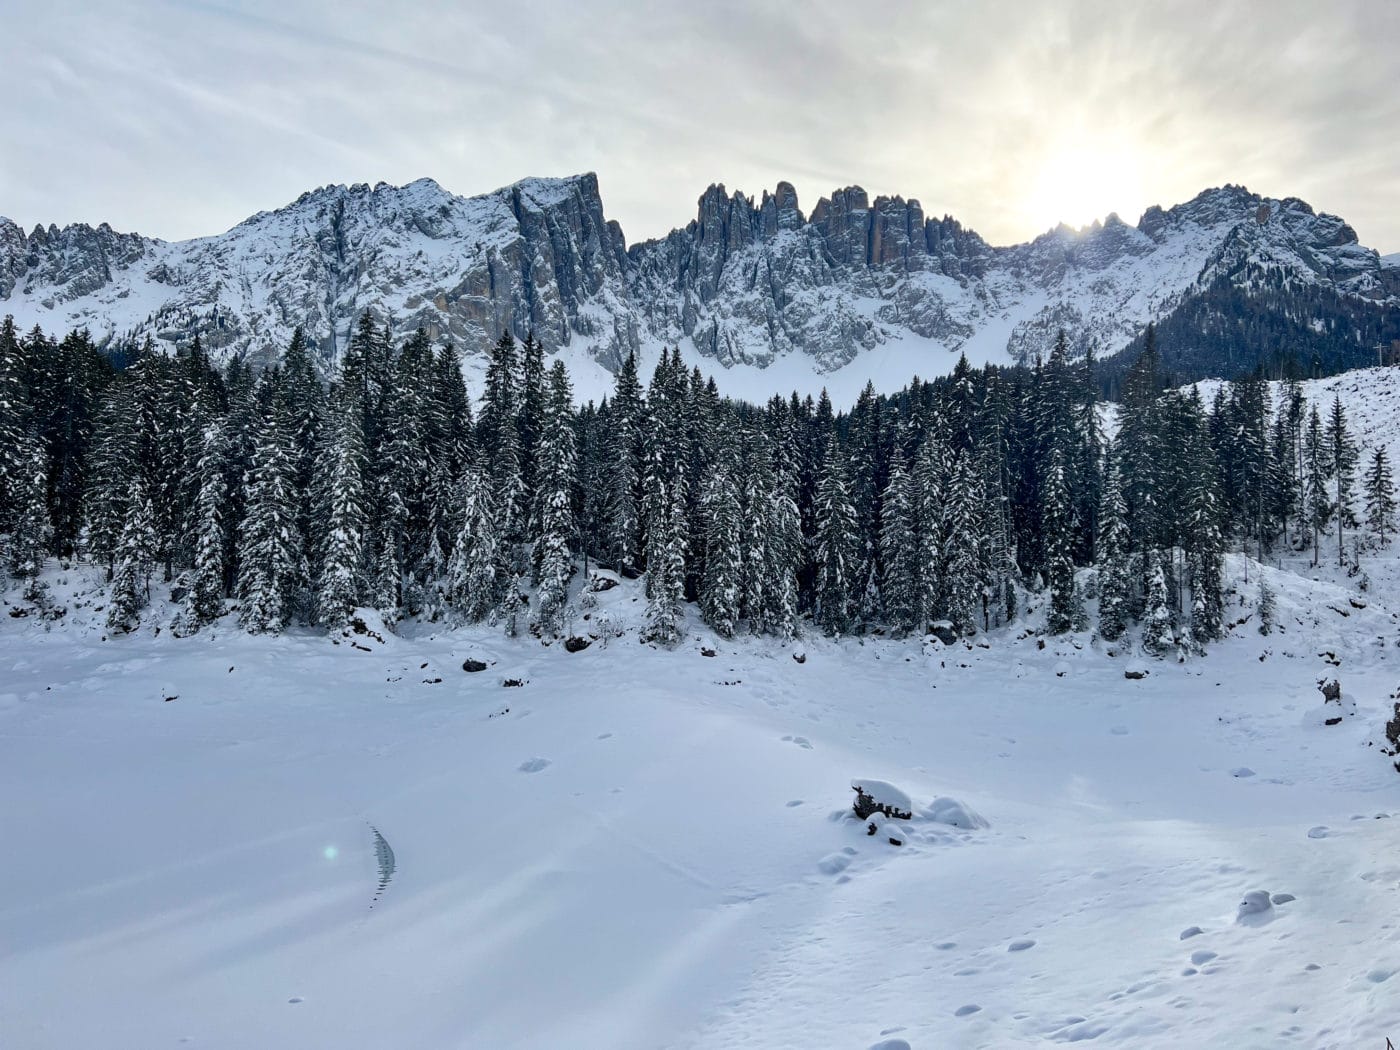 Lago di Carezza in Dolomites Italy frozen in the winter with snowy pine trees and snowcapped mountains in the background